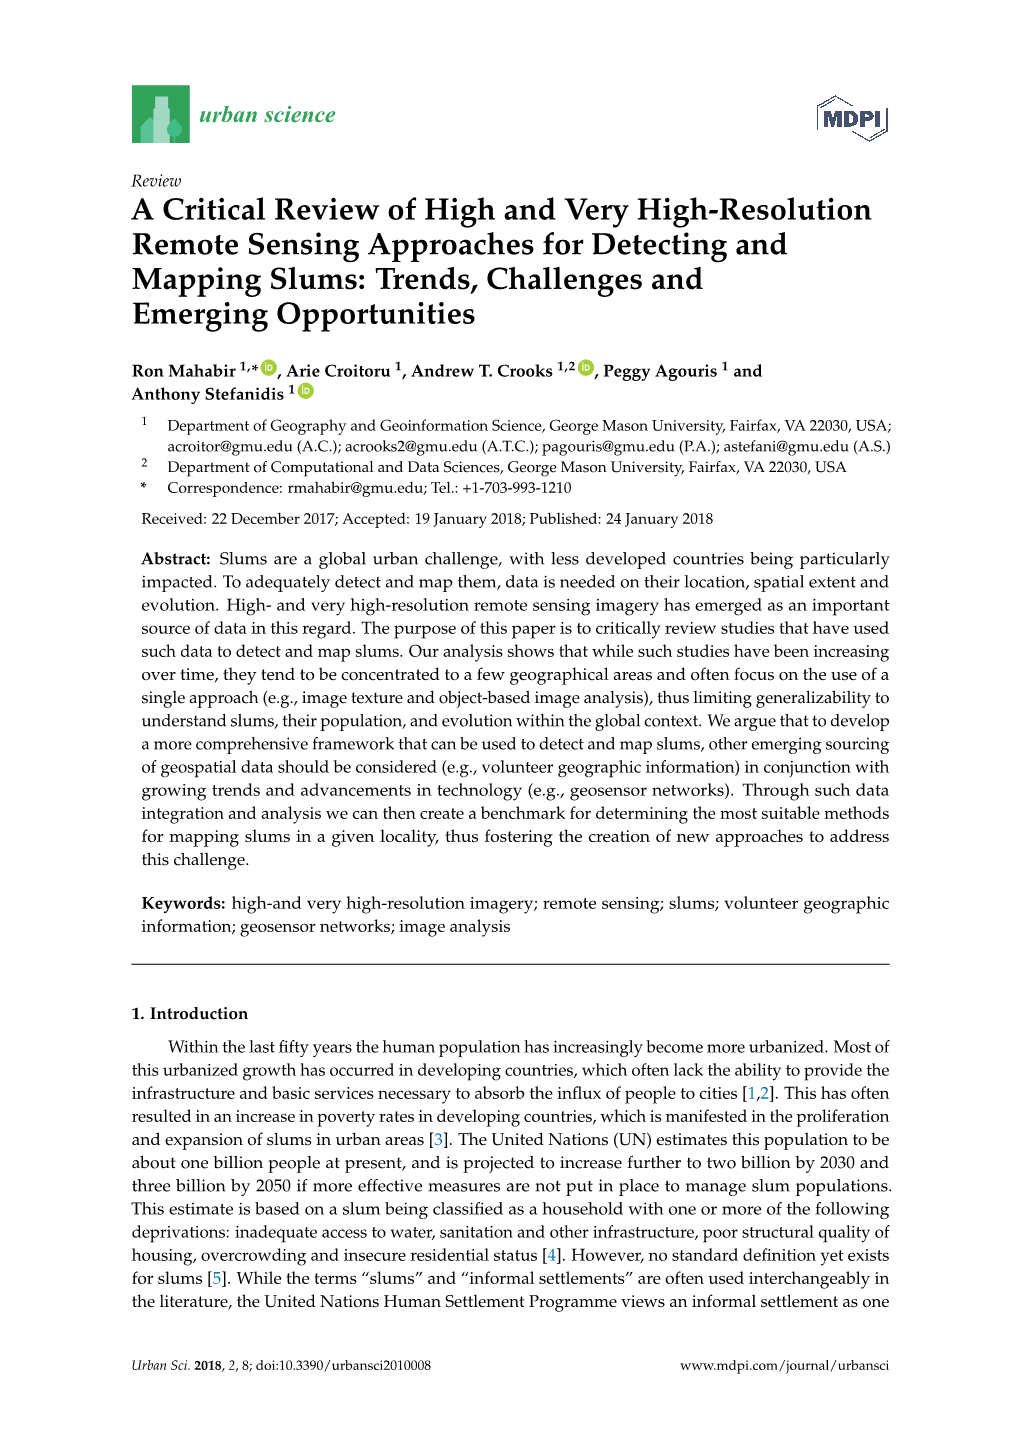 A Critical Review of High and Very High-Resolution Remote Sensing Approaches for Detecting and Mapping Slums: Trends, Challenges and Emerging Opportunities